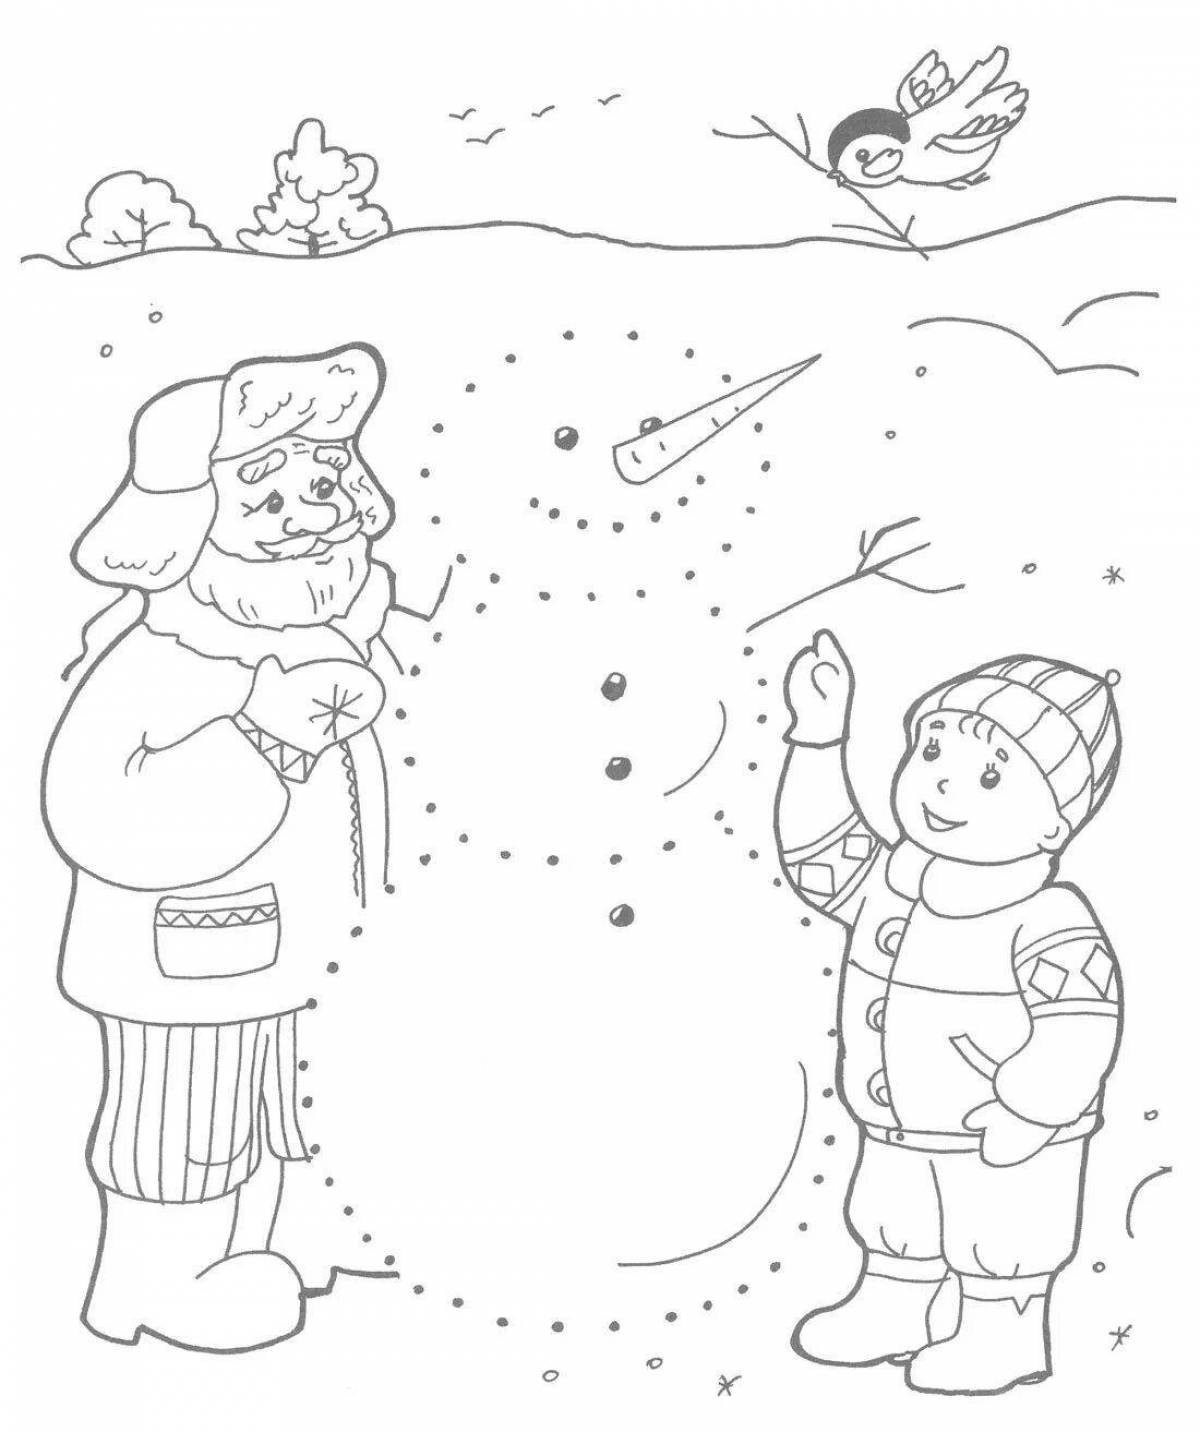 Incredible winter coloring book for 4-5 year olds